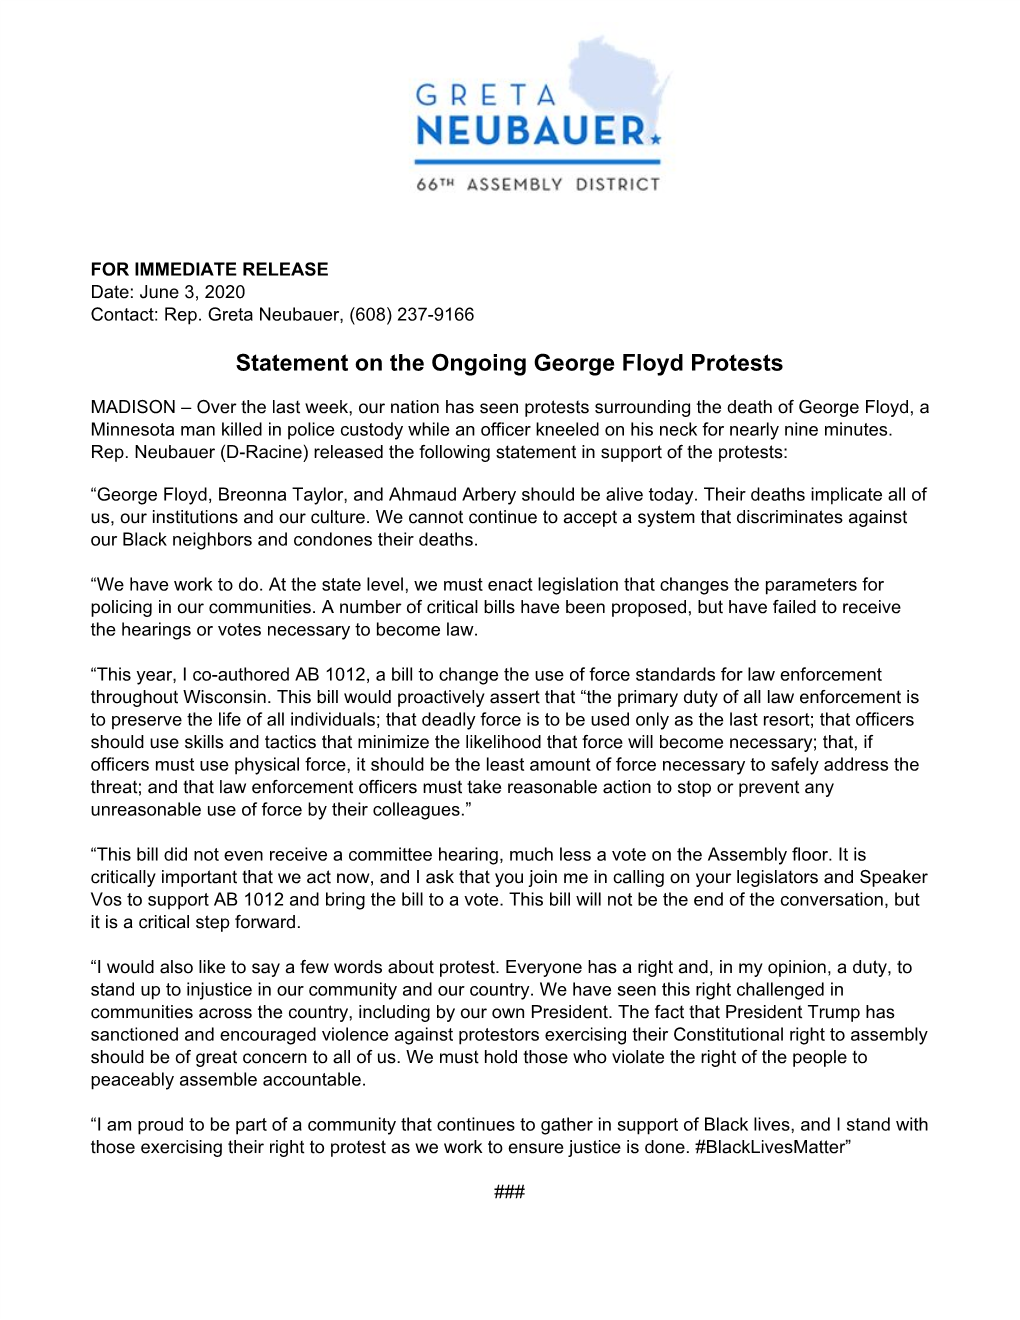 Statement on the Ongoing George Floyd Protests